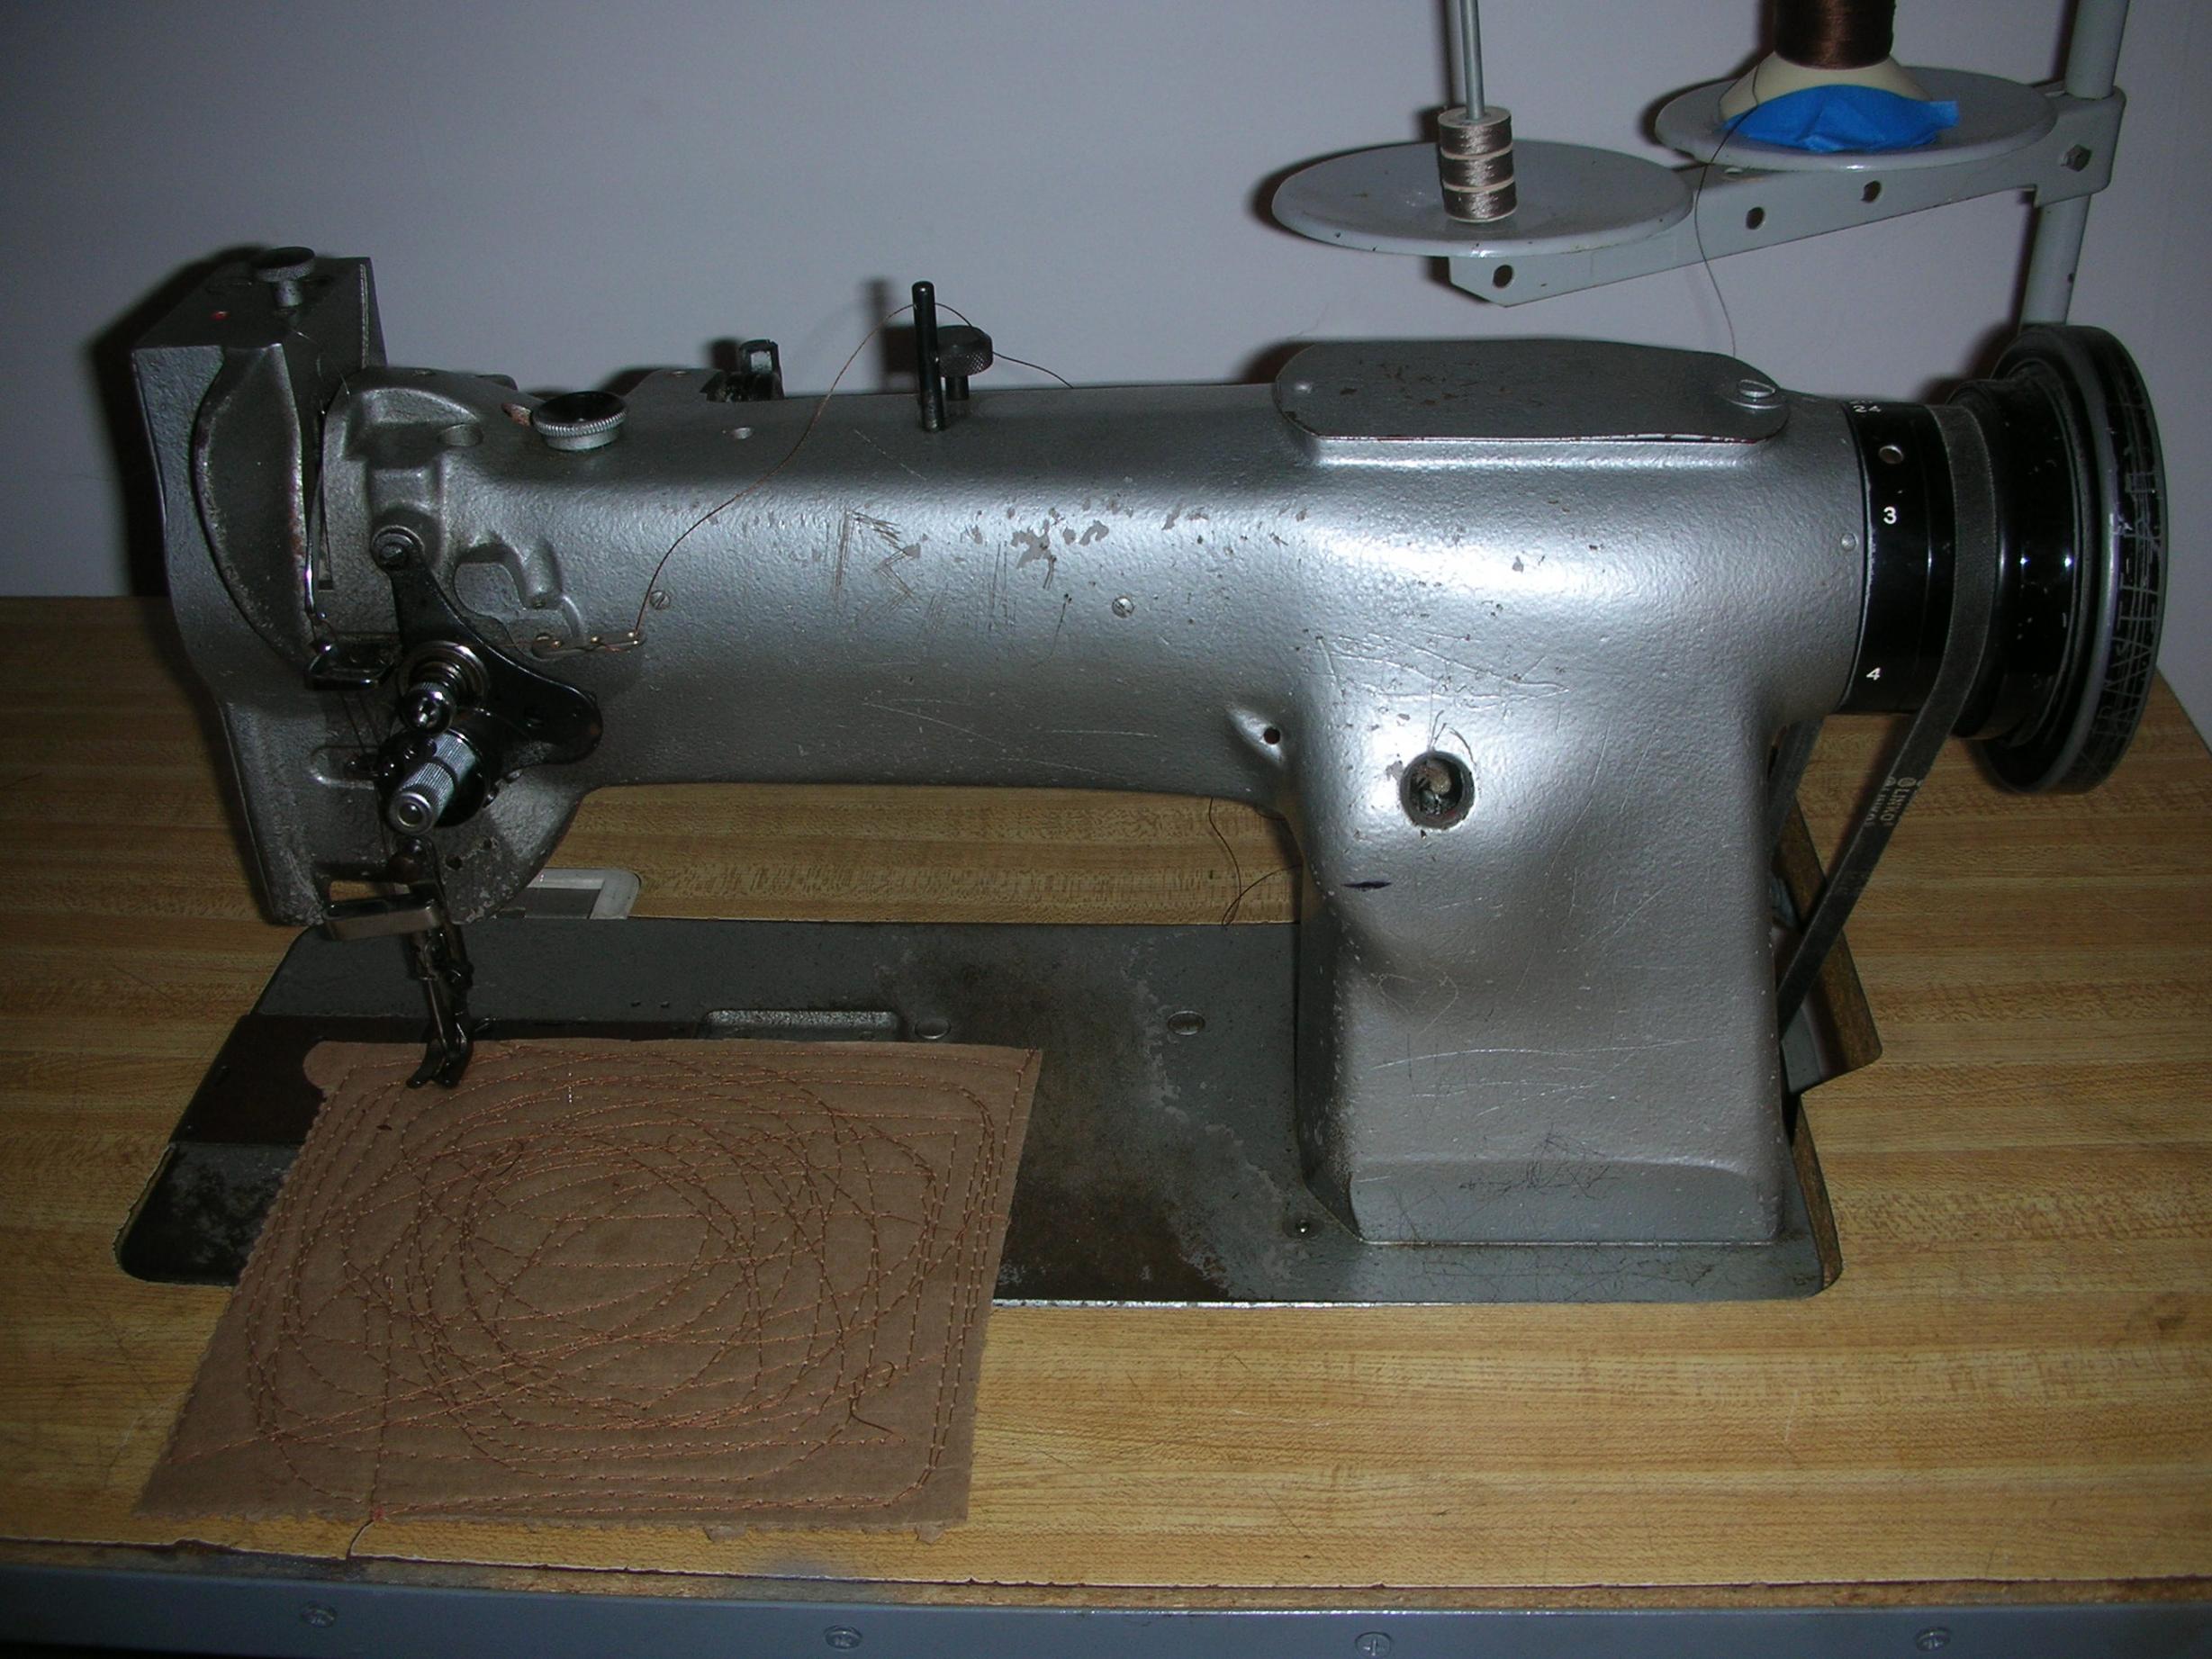 Toledo Industrial Sewing Machines, Ltd. - About Walking Foot Sewing Machines